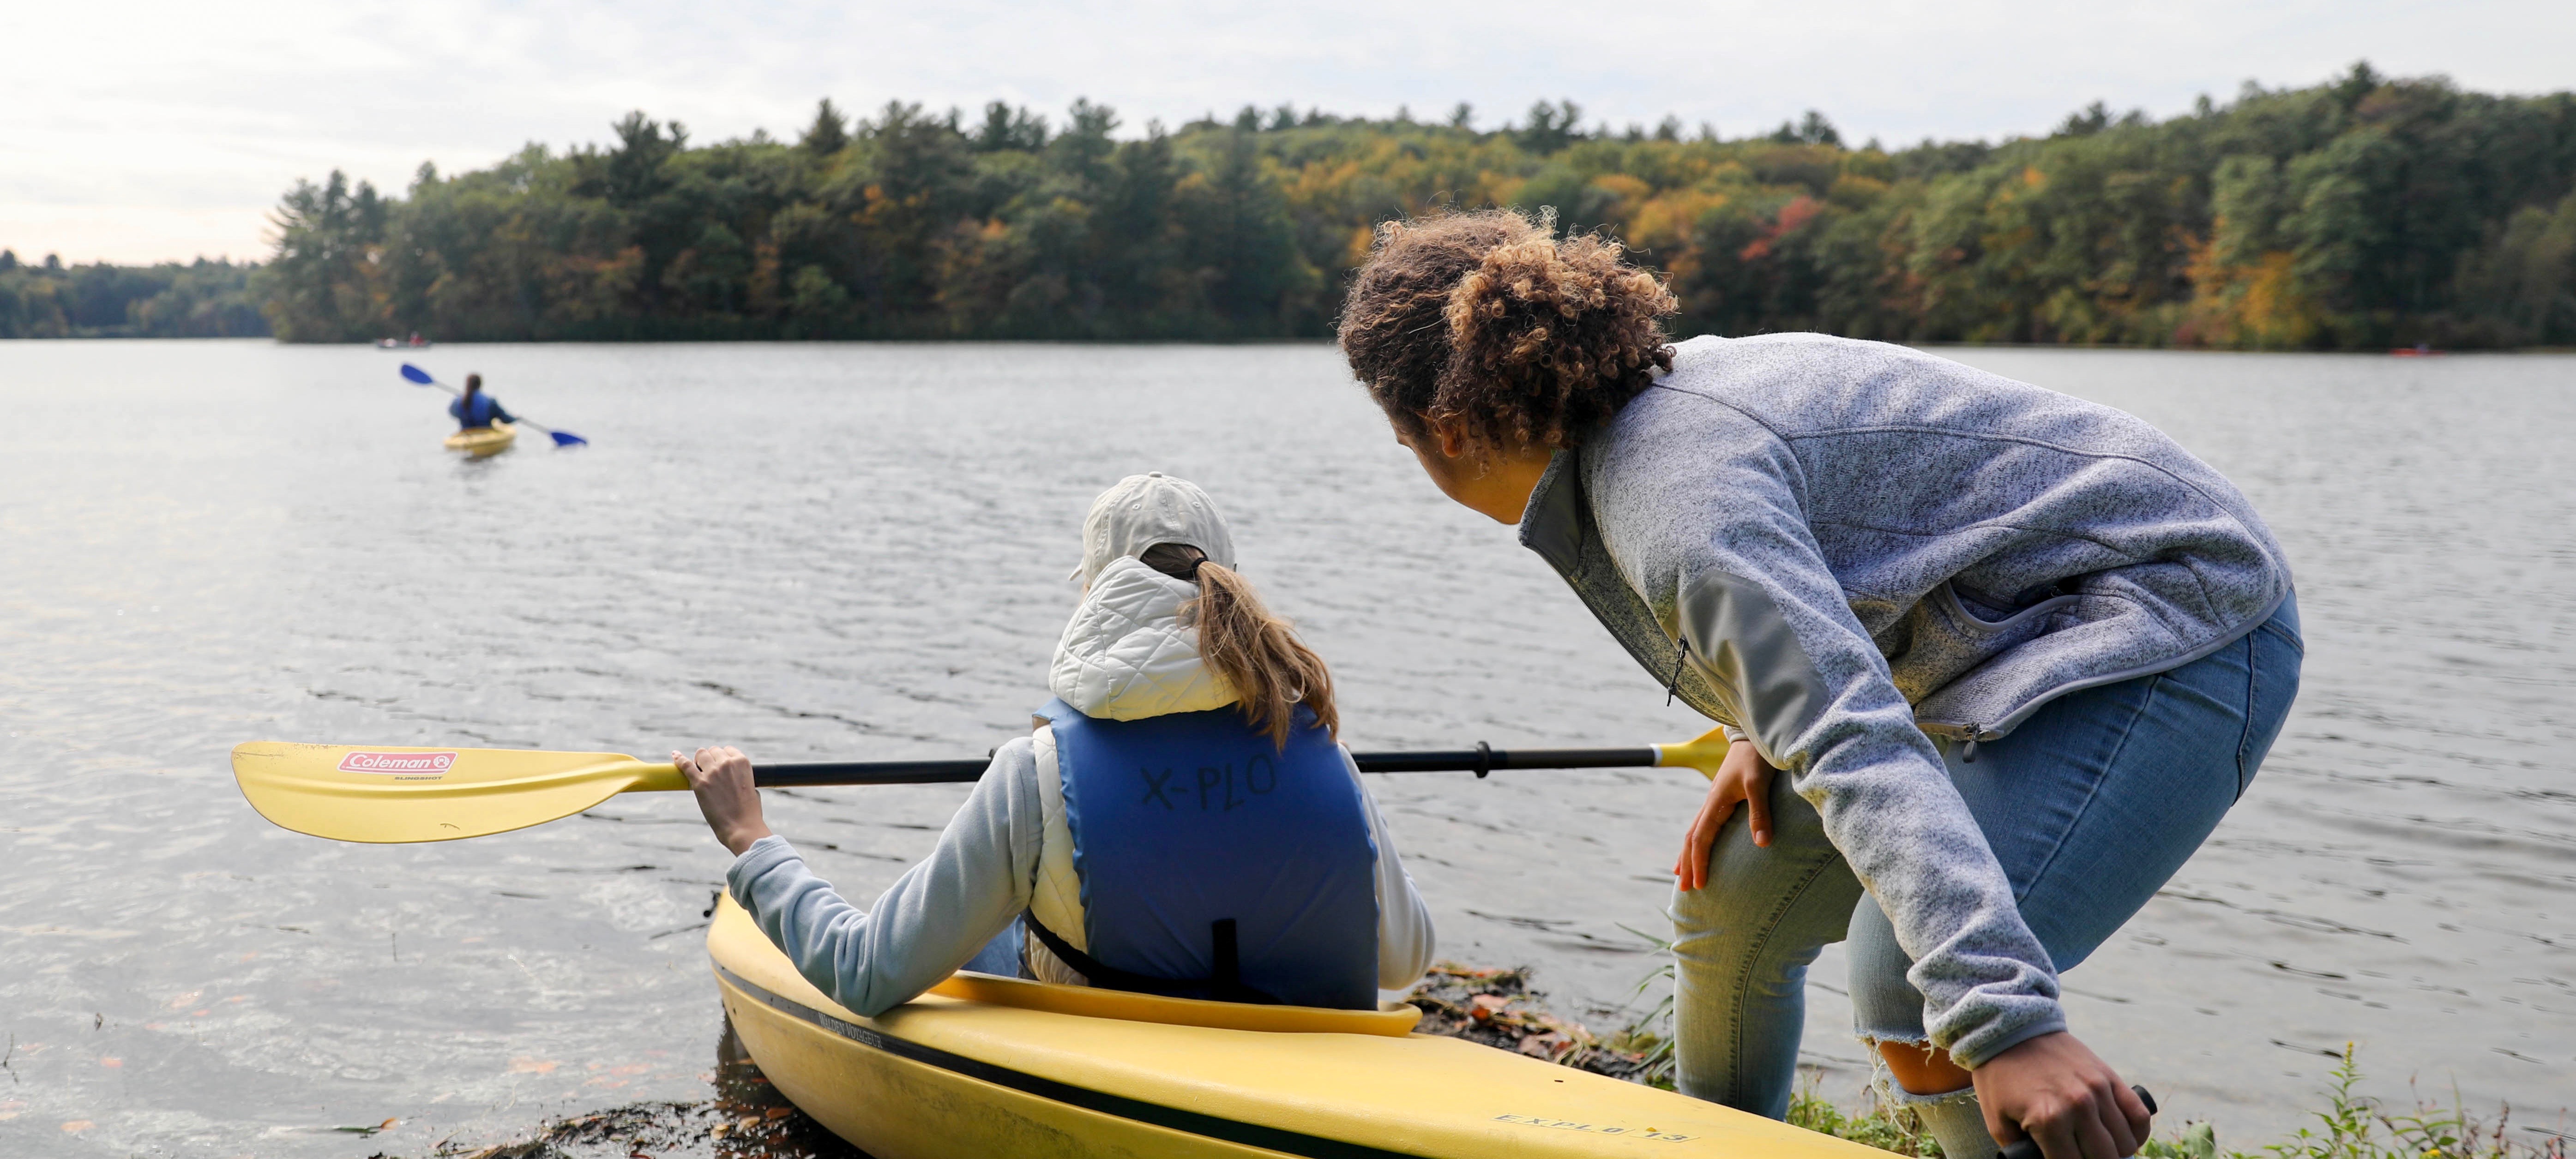 A student sits in a yellow kayak, wearing a blue life jacket. Another student is pushing them off from the shallow water.